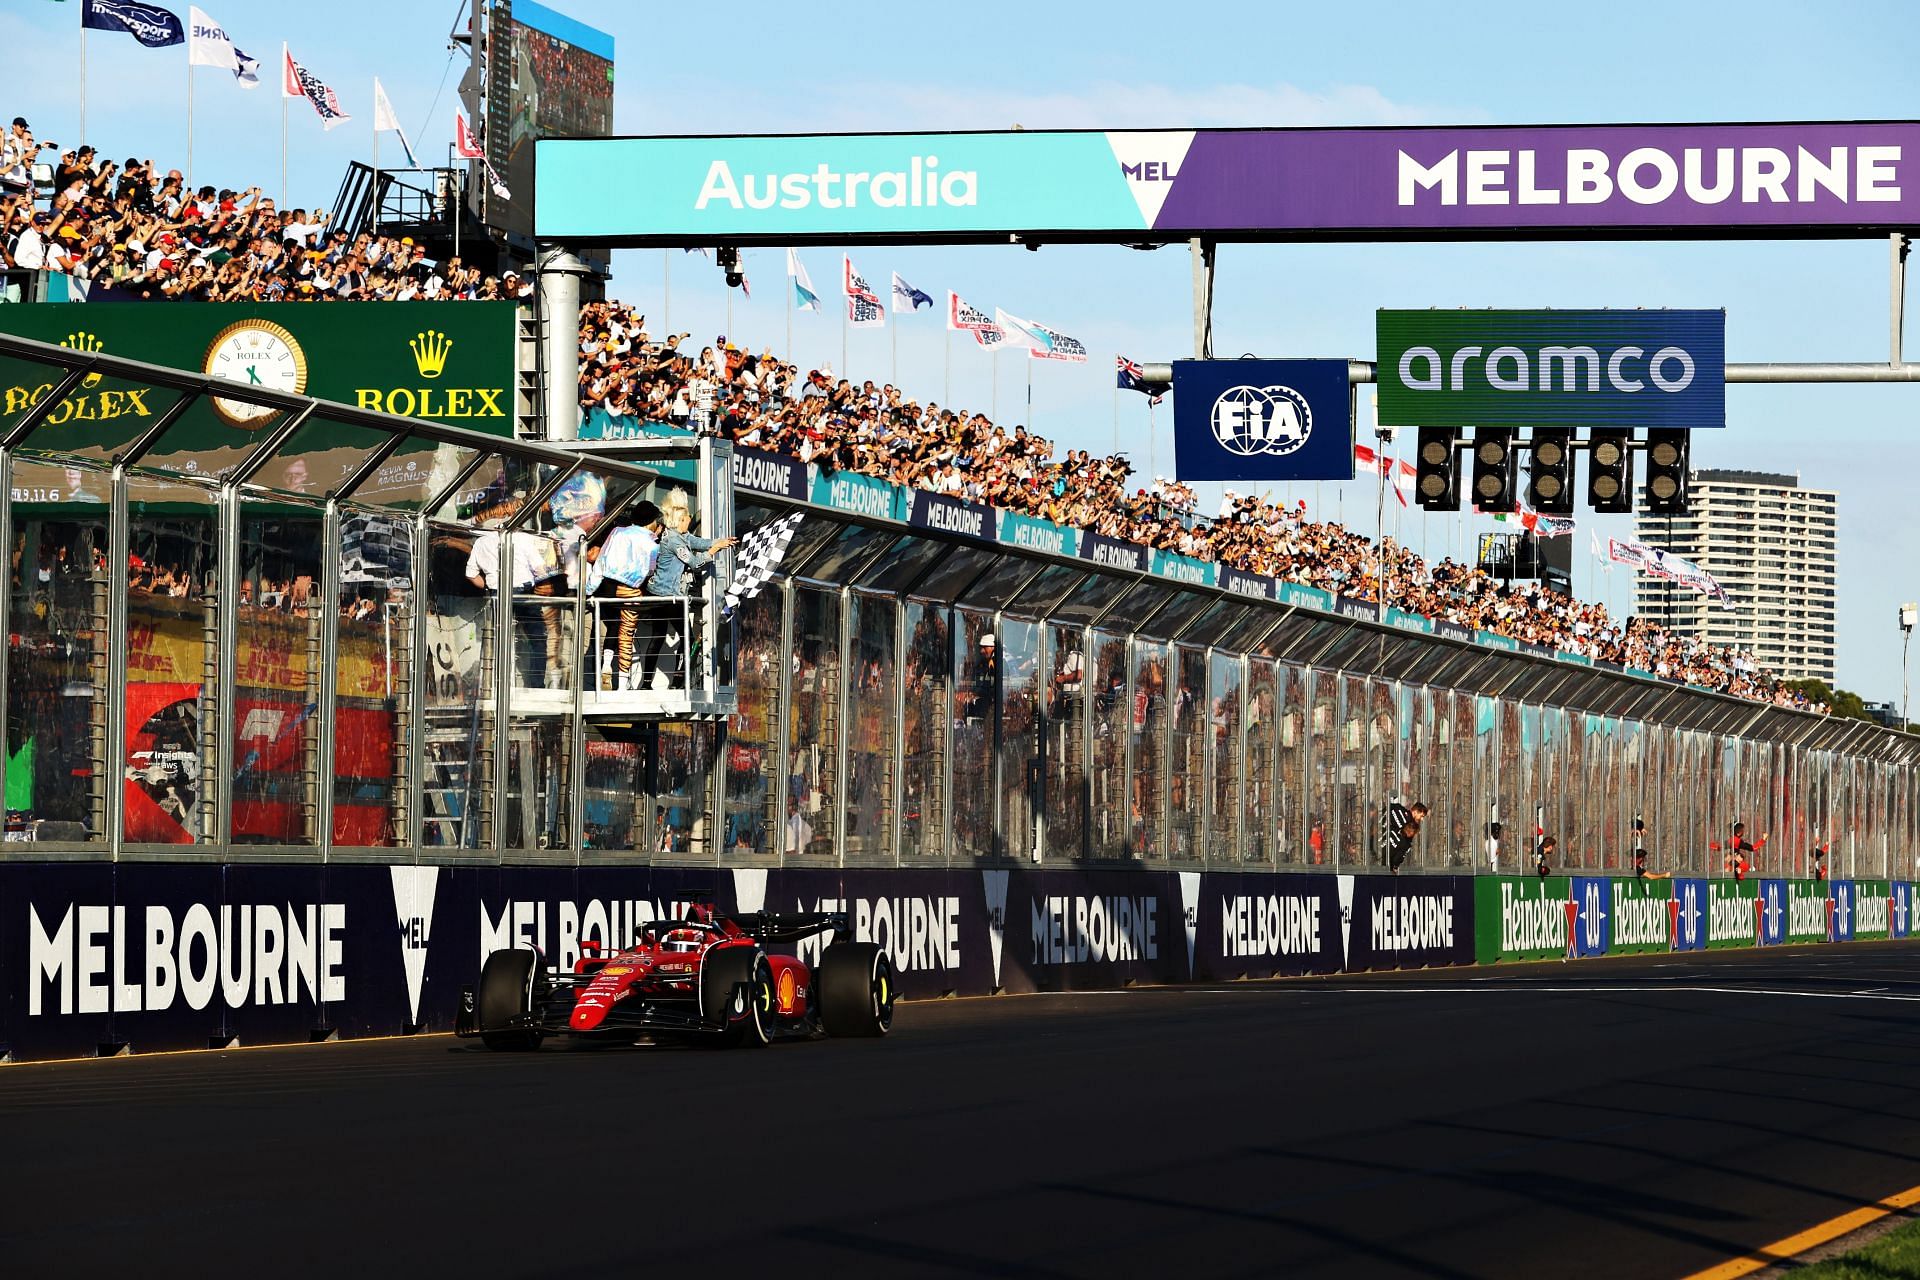 Charles Leclerc picked up his second win of the 2022 F1 season at the Australian GP